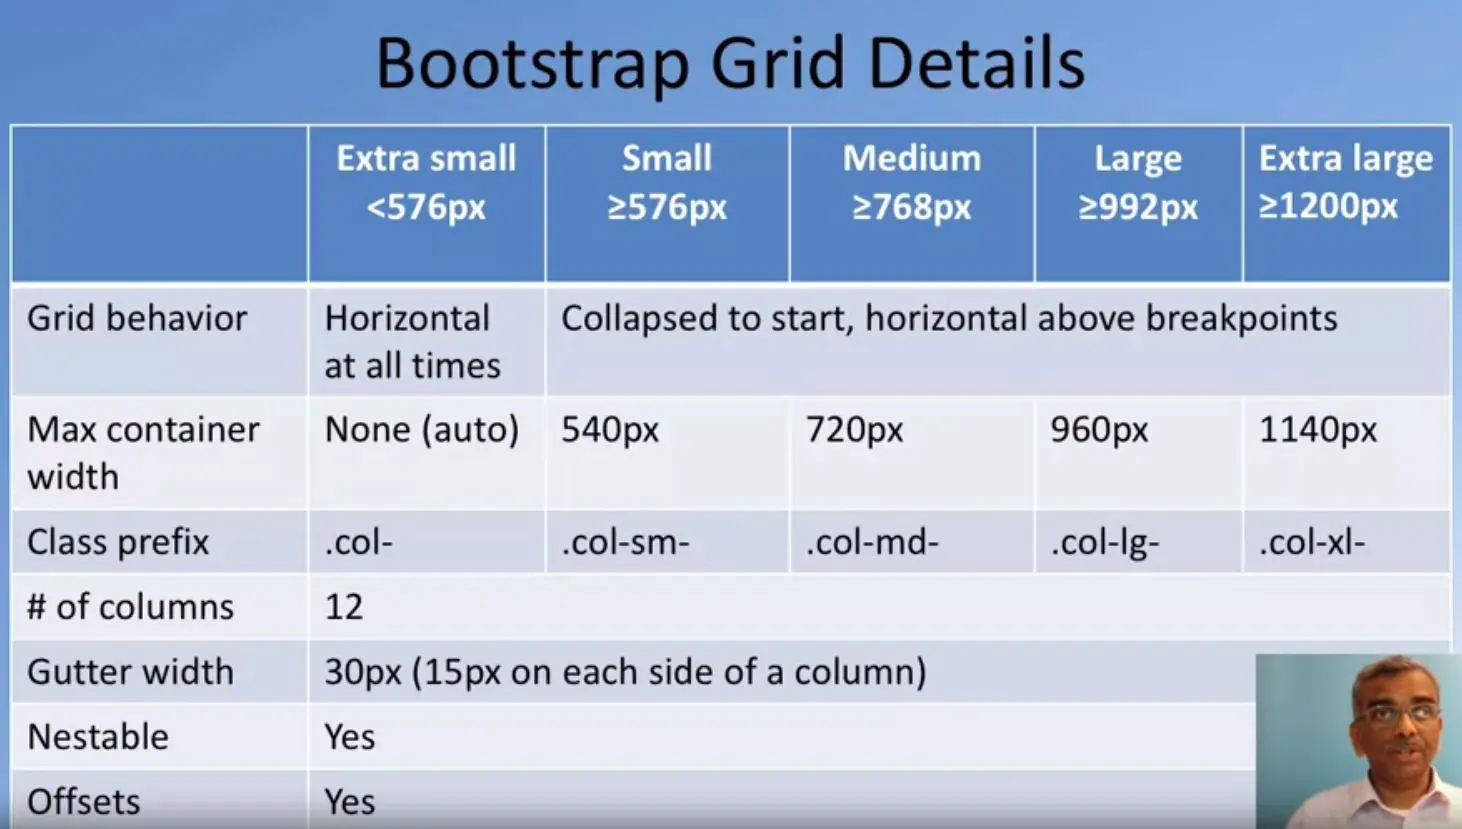 Bootstrap Grid Details table.